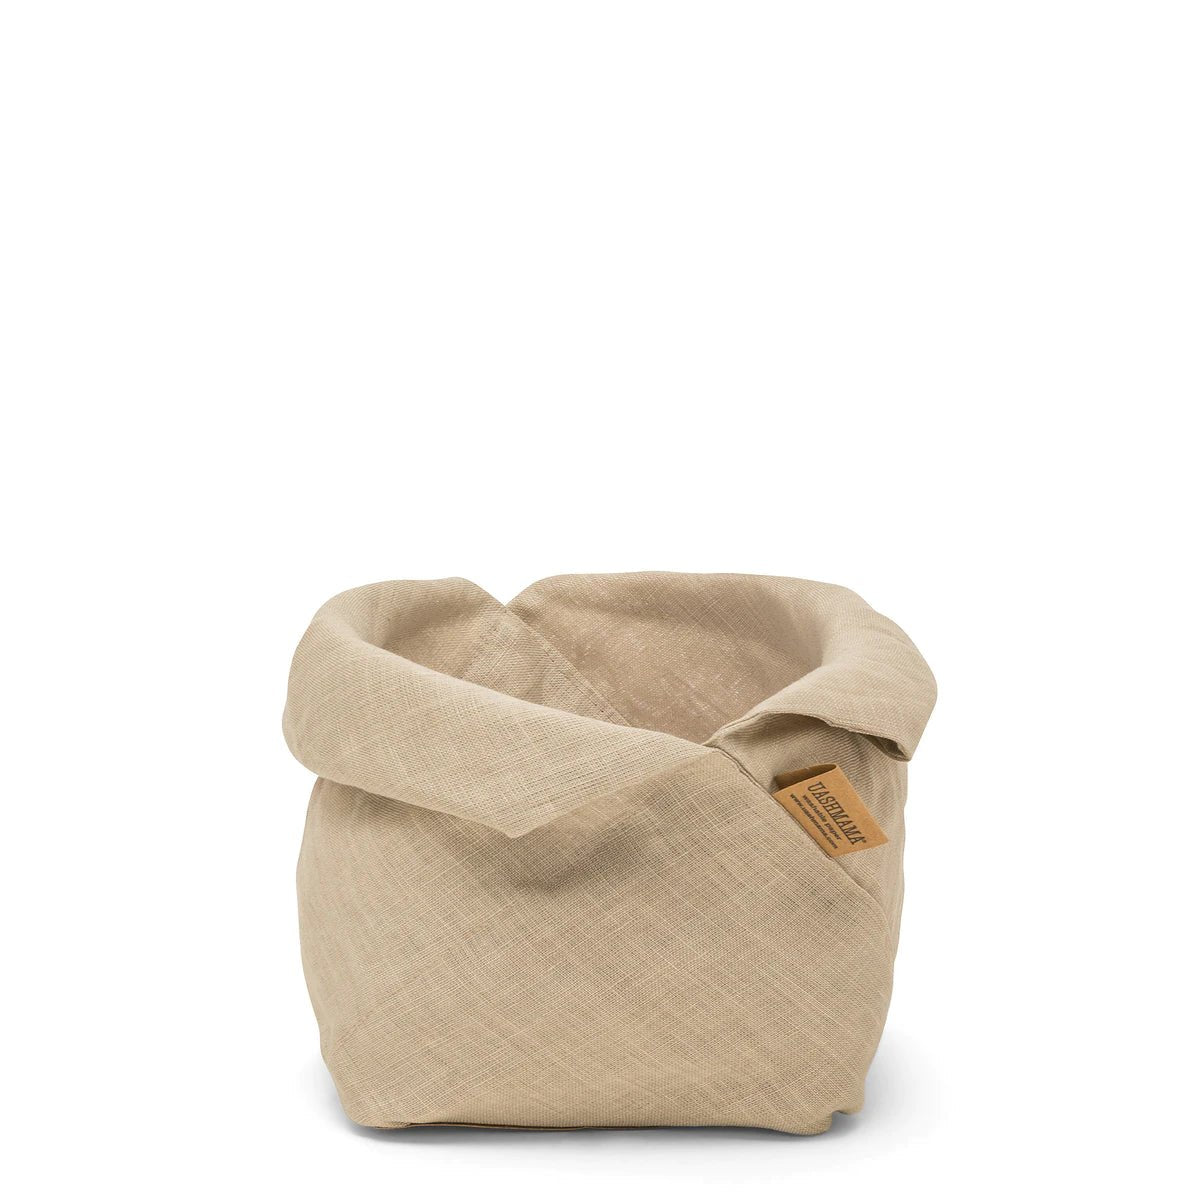 A natural toned linen bread bag is featured from the front, with a brown Uashmama logo tag at right.